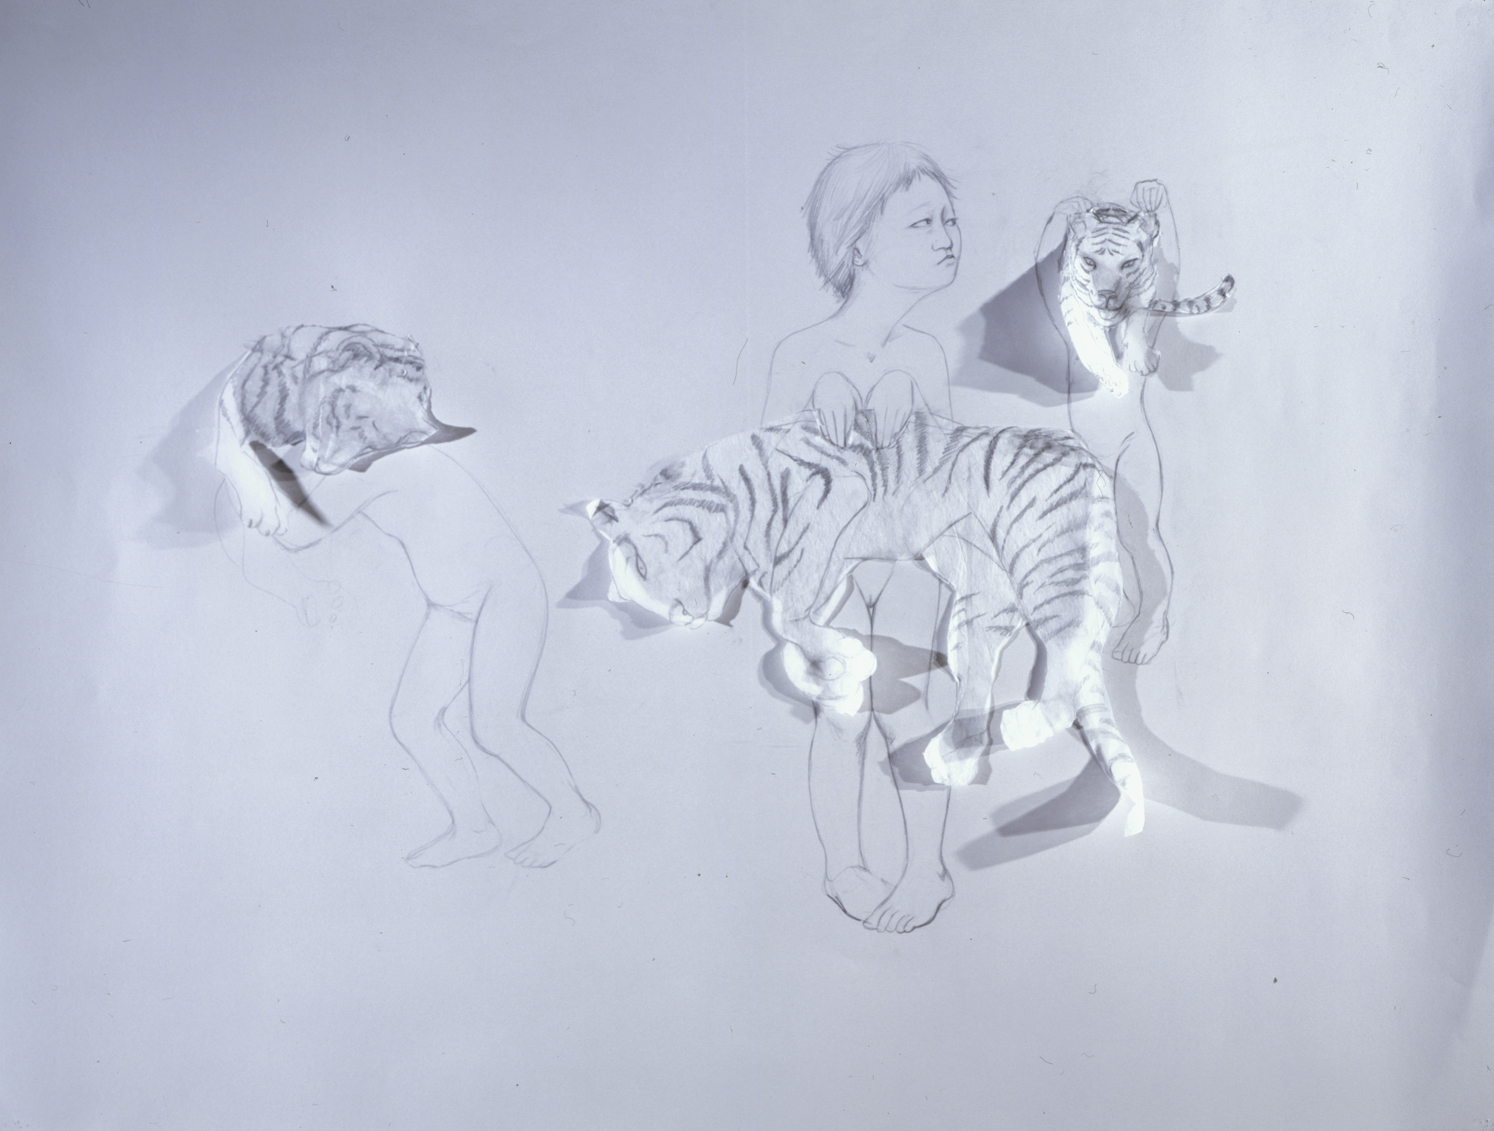   Paper Tigers , 2004 Graphite, kozo on gray paper 38 X 50 inches&nbsp; 